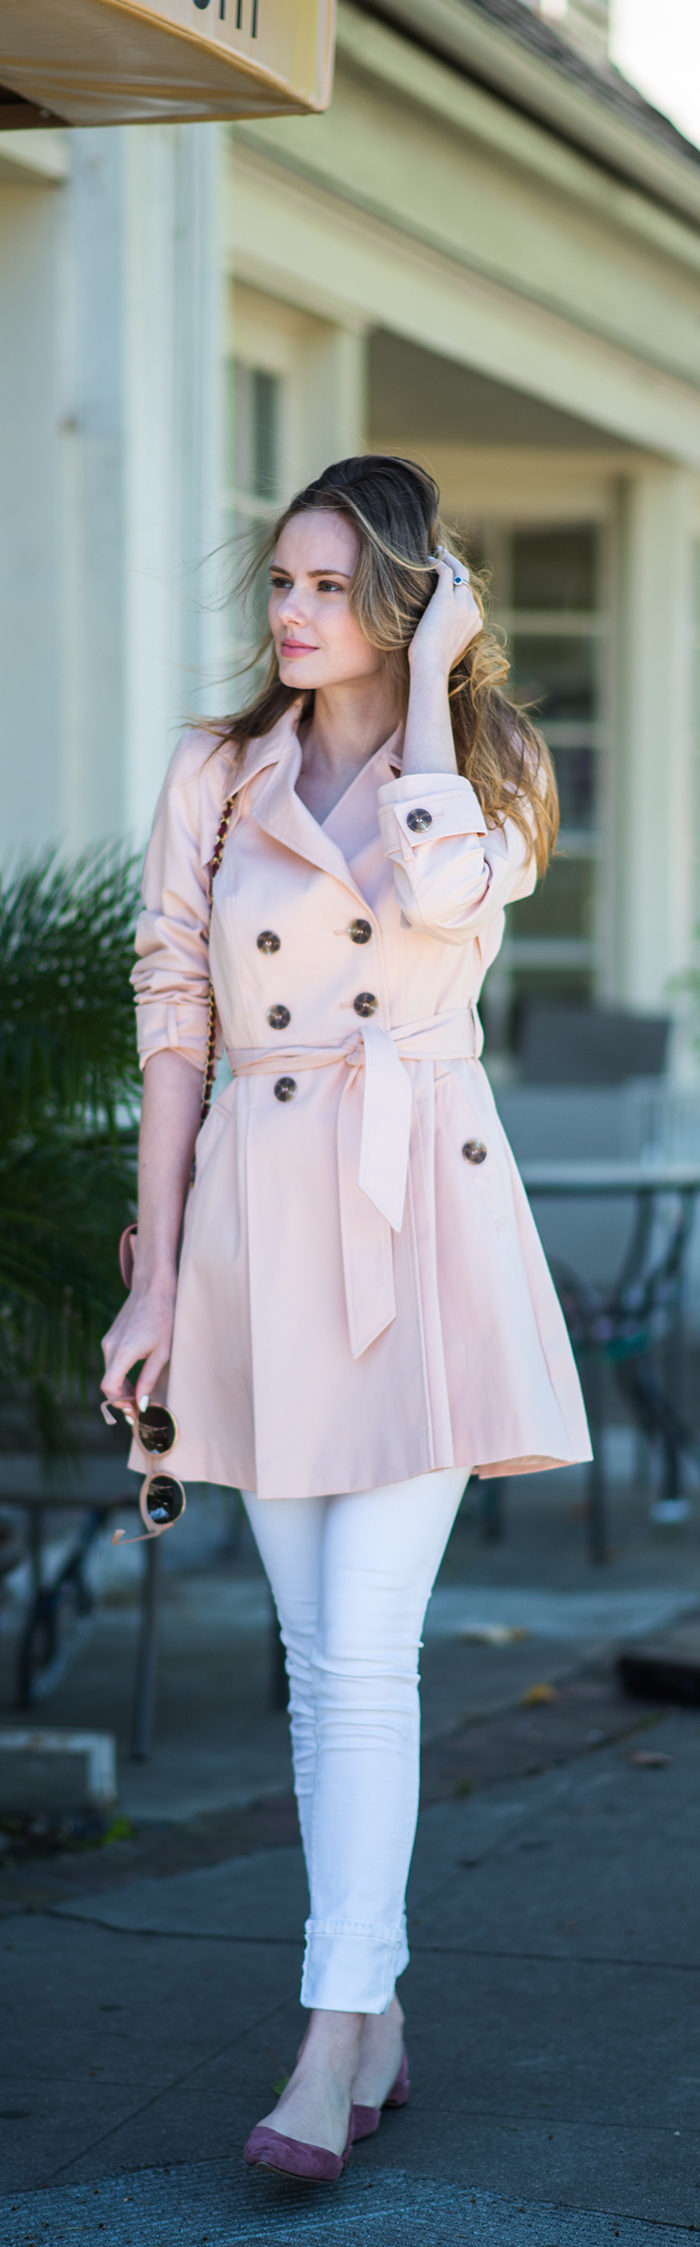 Miss USA 2011 Alyssa Campanella of The A List blog wearing a pink ASOS trench coat and Paul Andrew Rhea flats in Los Angeles